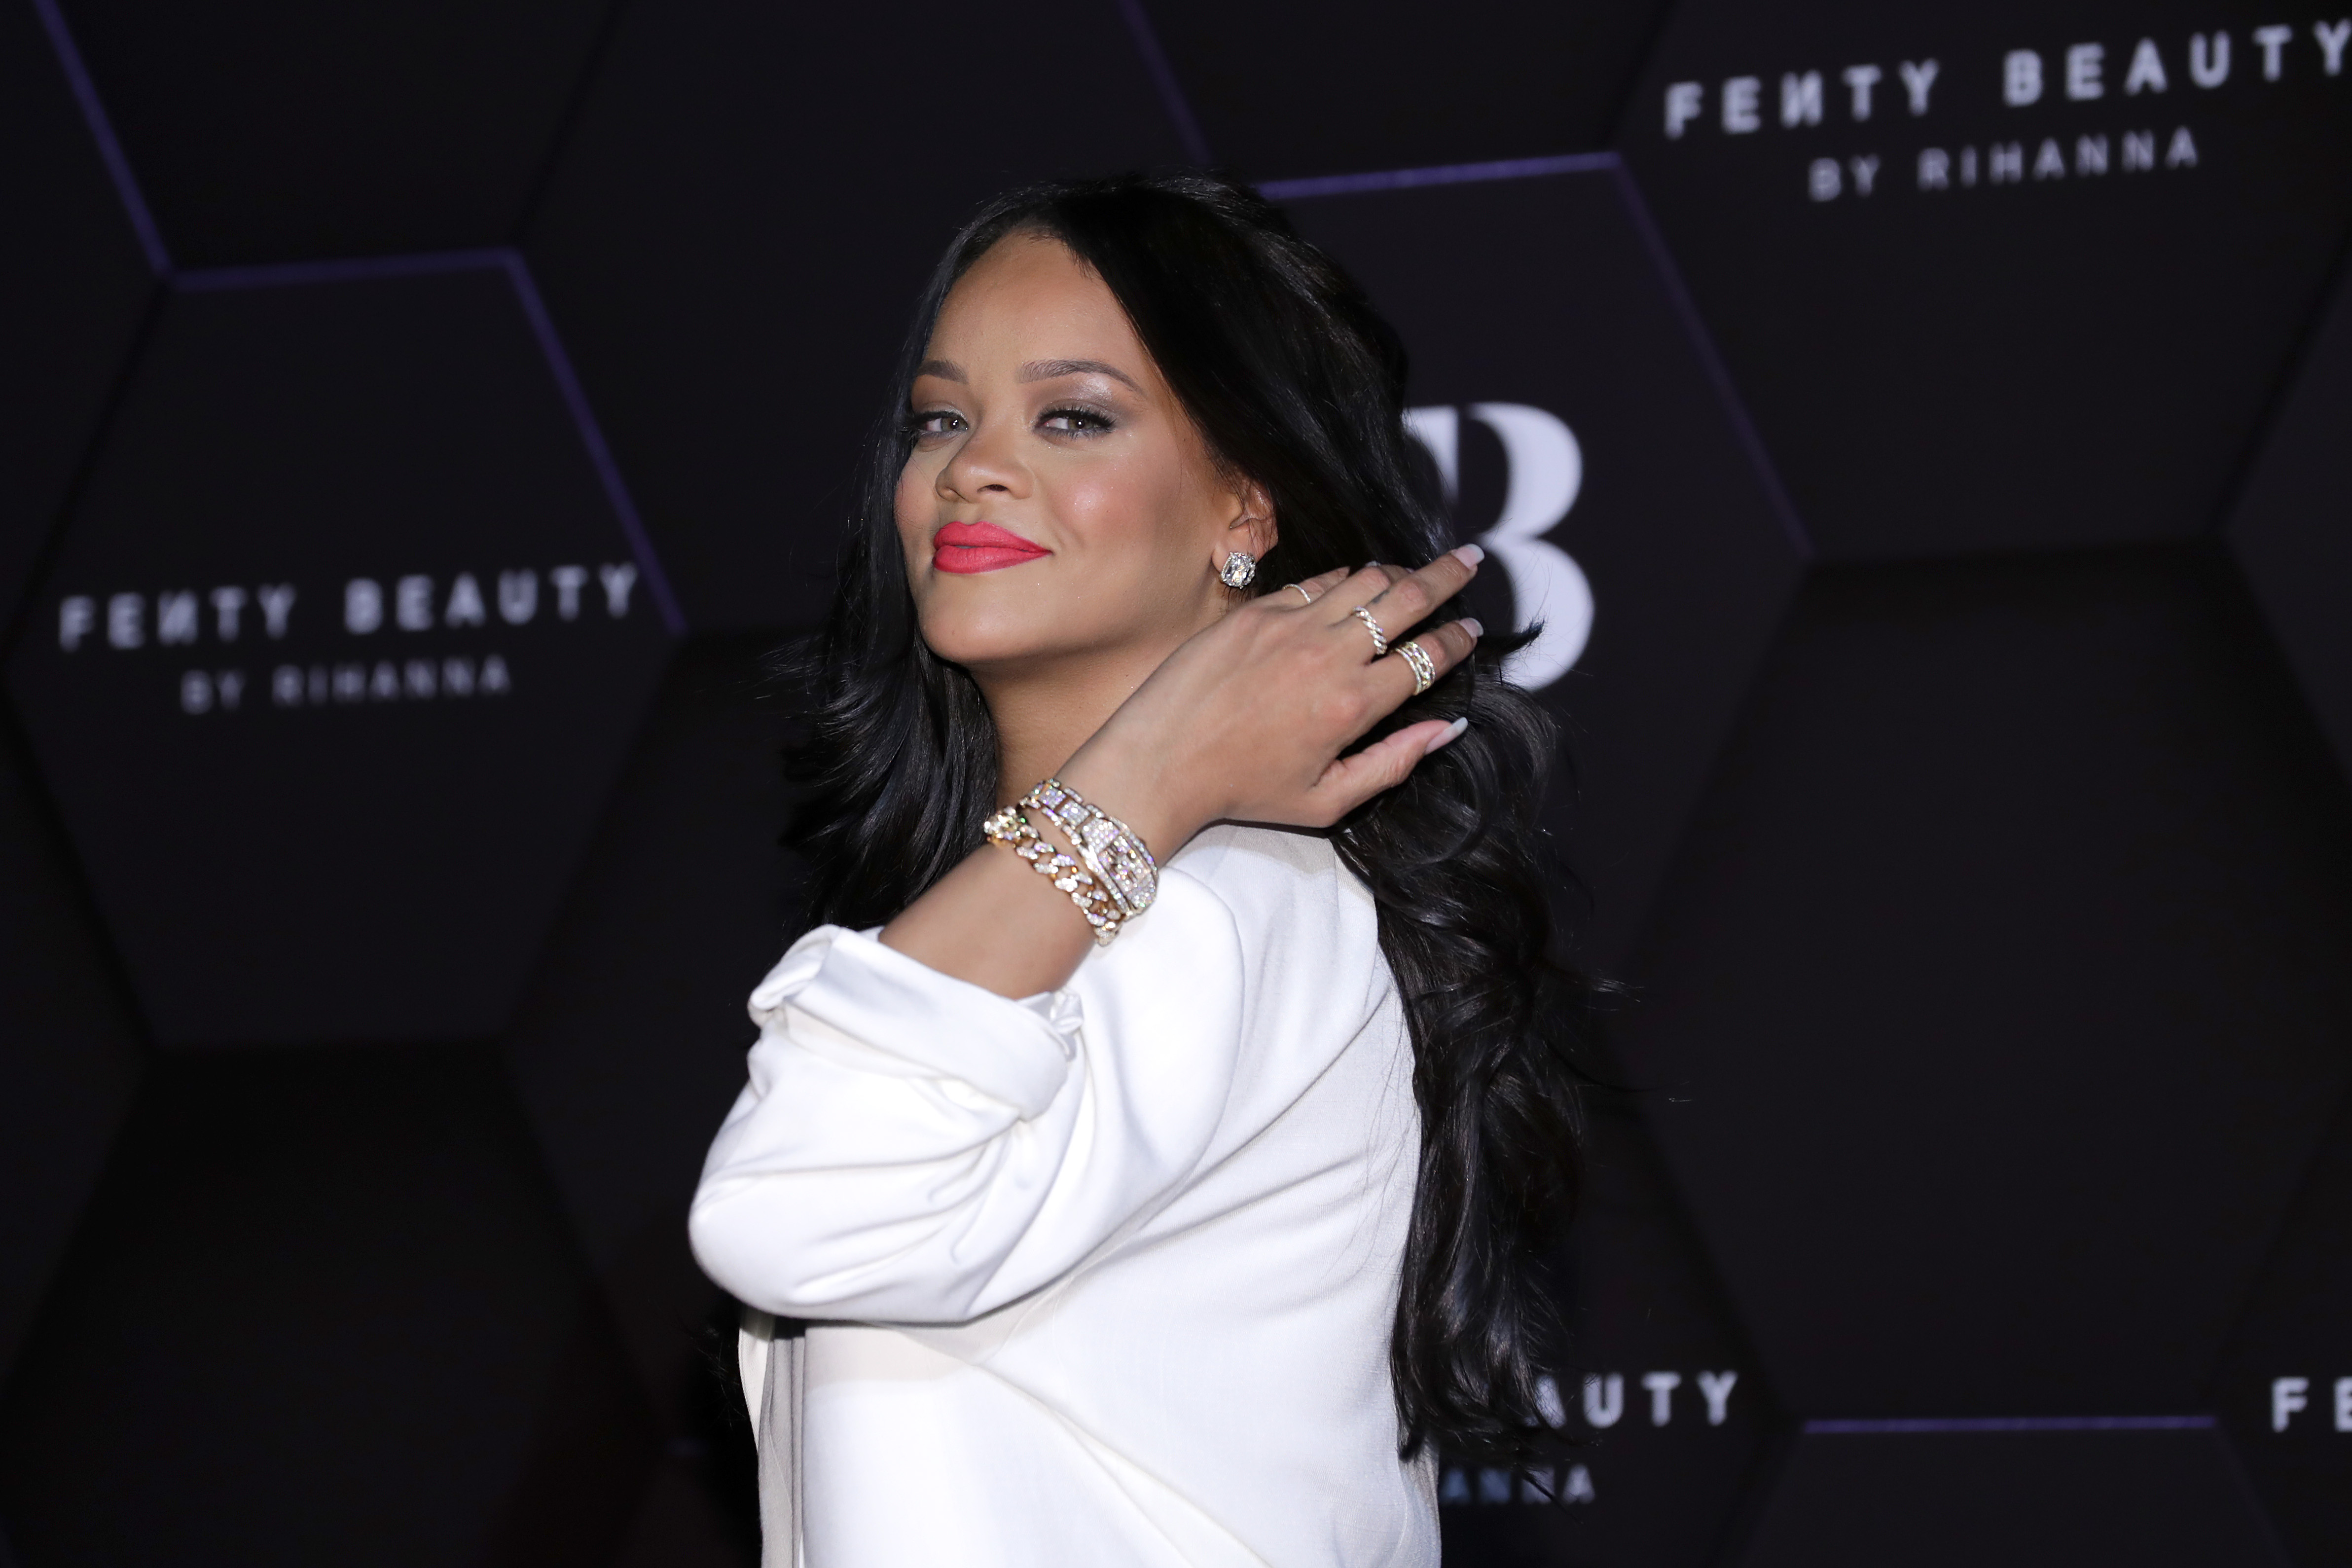 Rihanna wearing a white suit